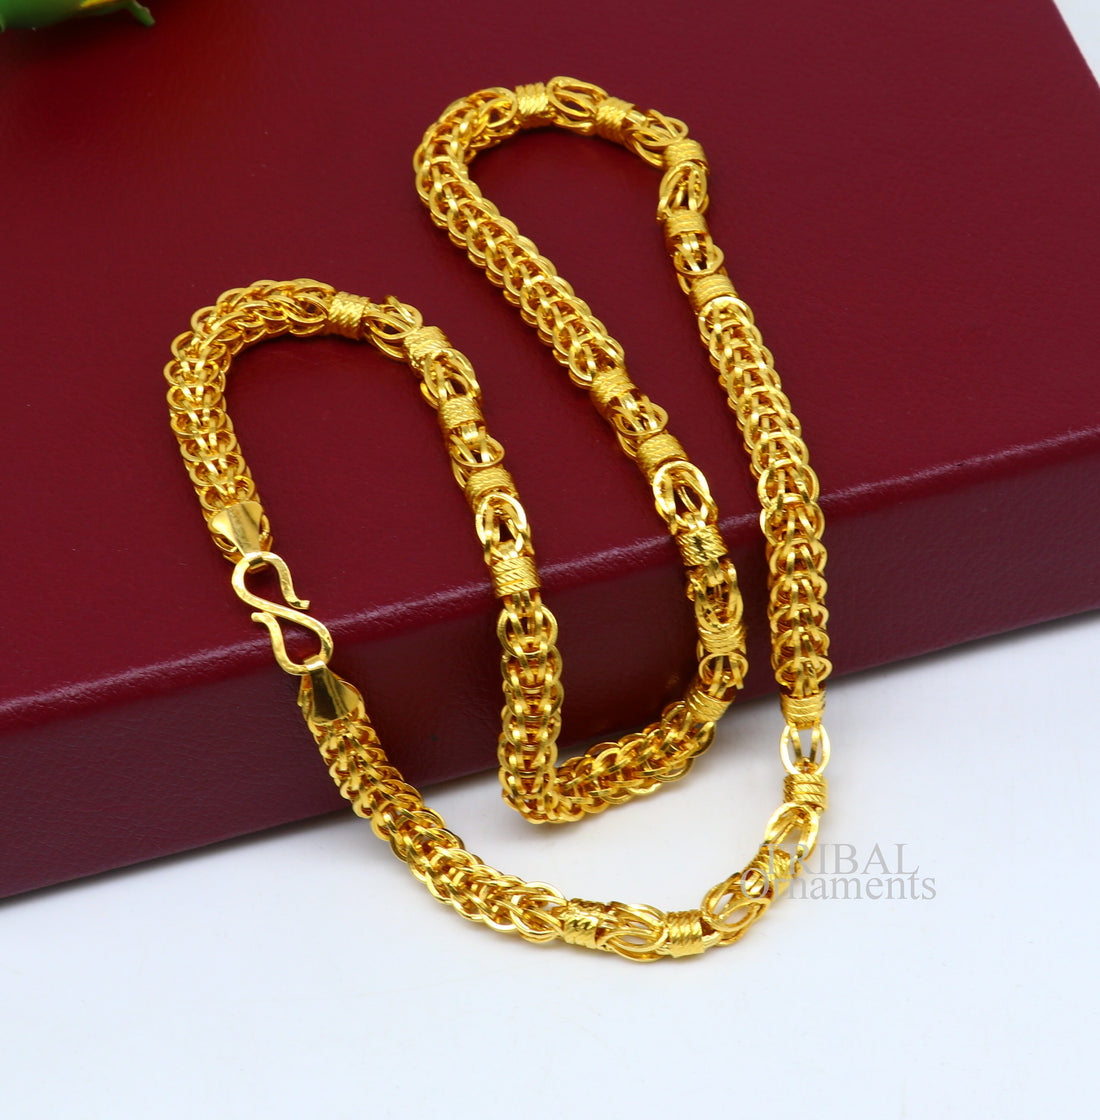 22kt yellow gold handmade customized design stylish byzantine chain necklace, best gifting unisex chain, hallmarked chain necklace ch549 - TRIBAL ORNAMENTS